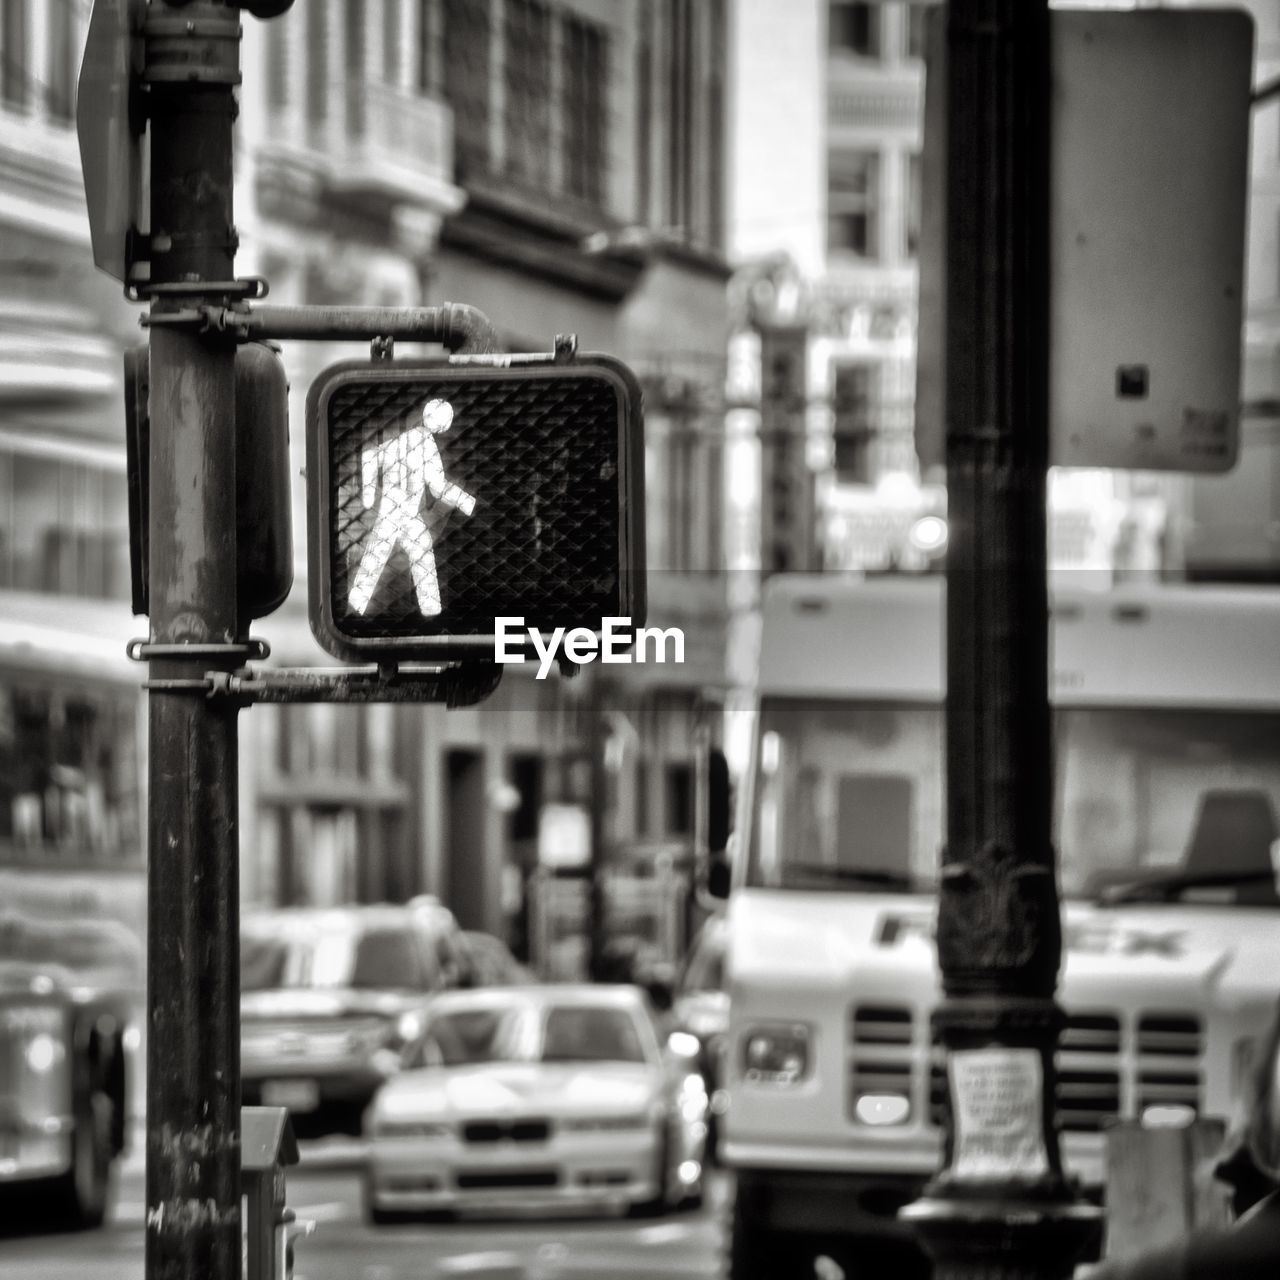 Pedestrian crossing sign against vehicles on street in city